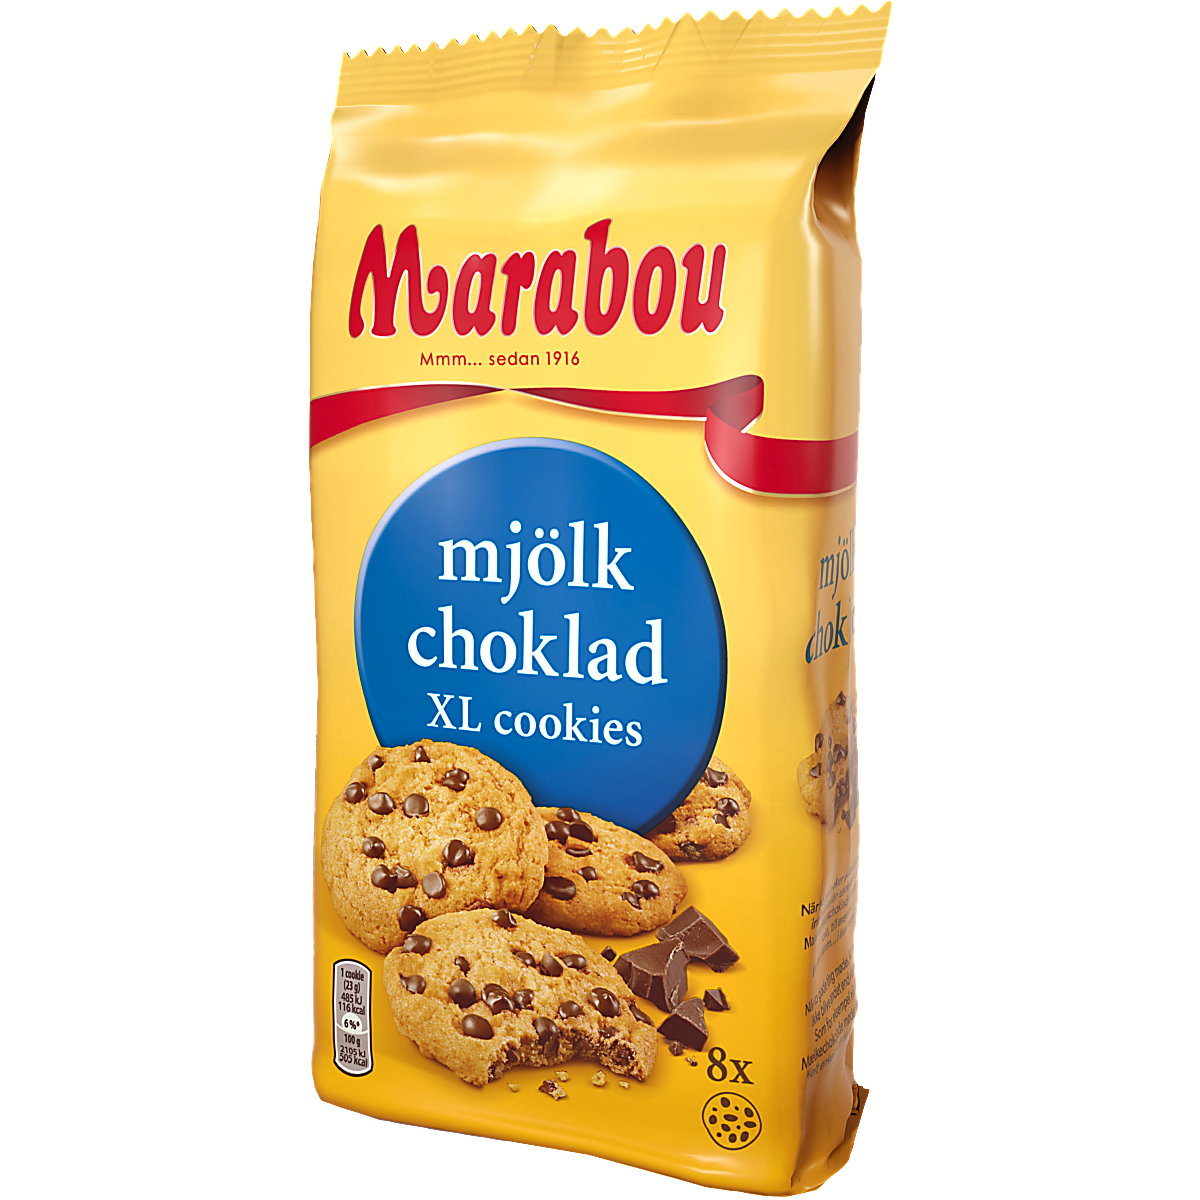 Marabou Milk Chocolate XL Cookies by Swedish Candy Store